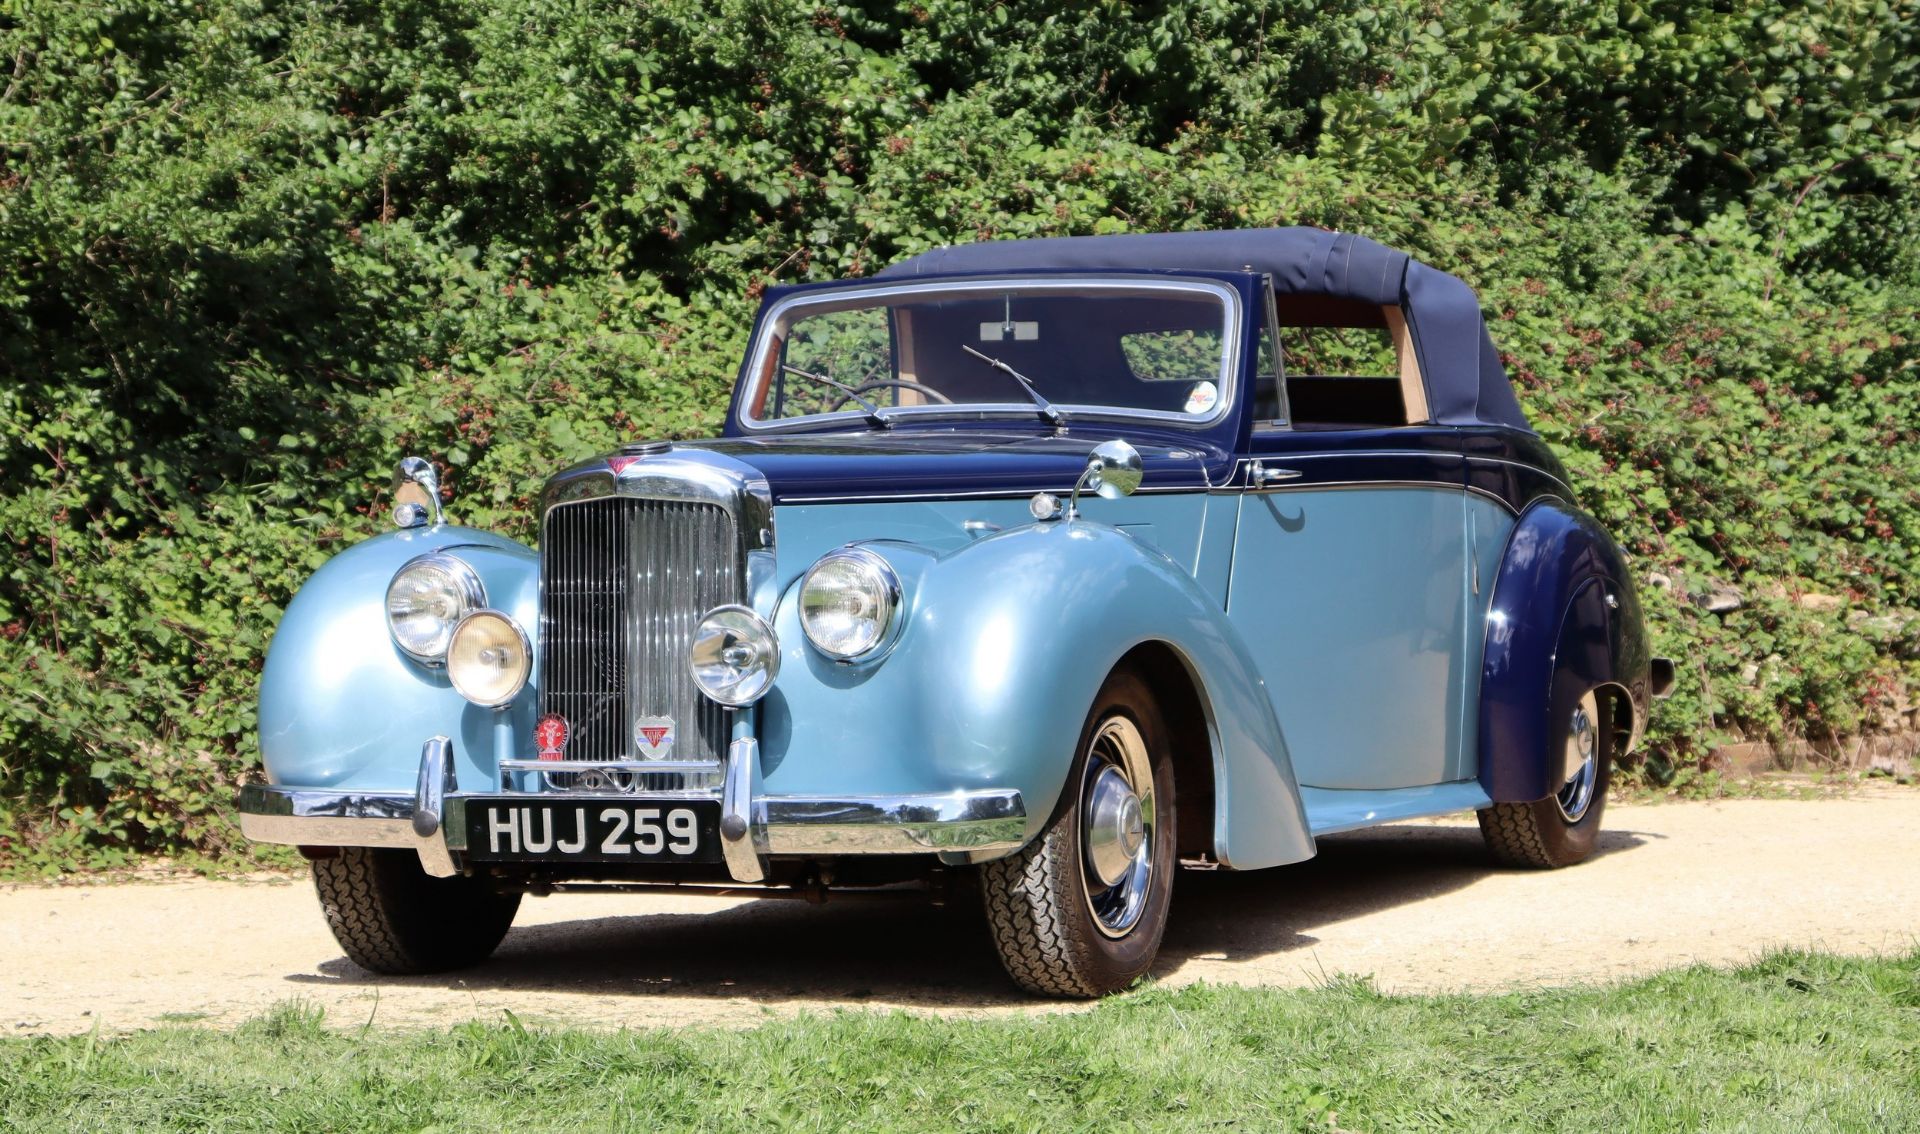 1952 ALVIS TA21 THREE-POSITION DROPHEAD COUPE Registration Number: HUJ 259 Chassis Number: 24489 - Image 4 of 44